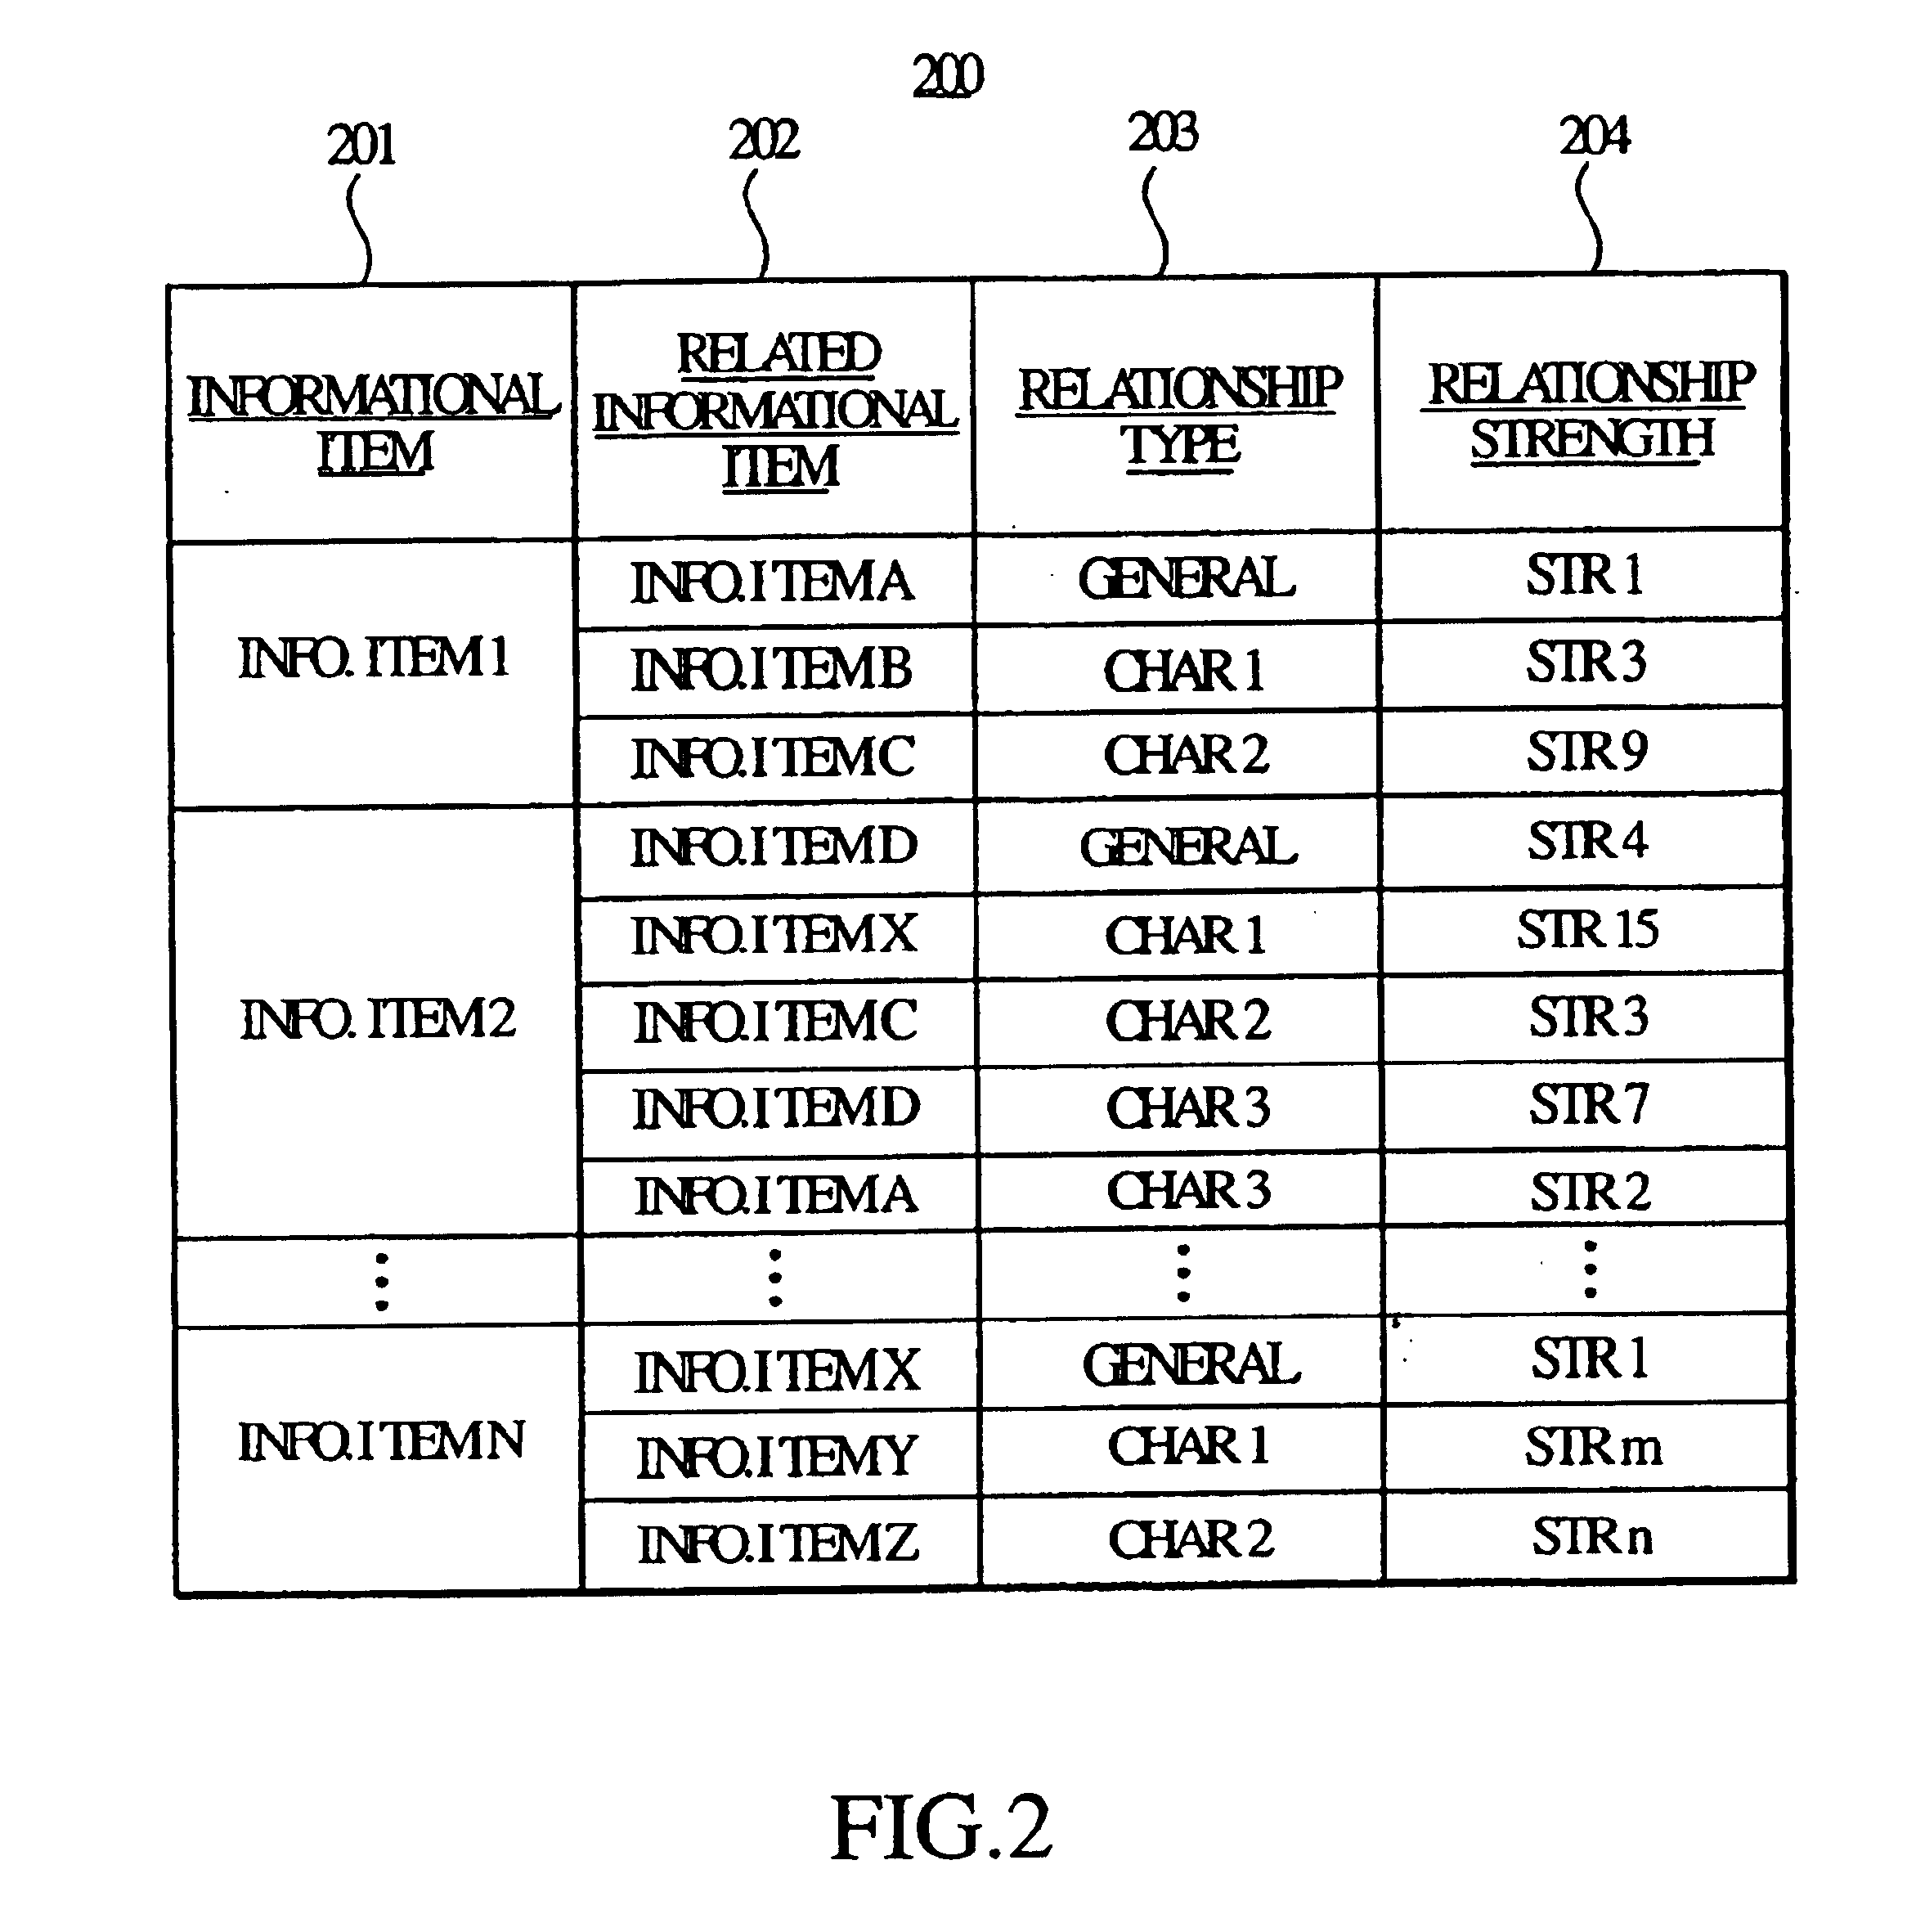 Usage based strength between related information in an information retrieval system